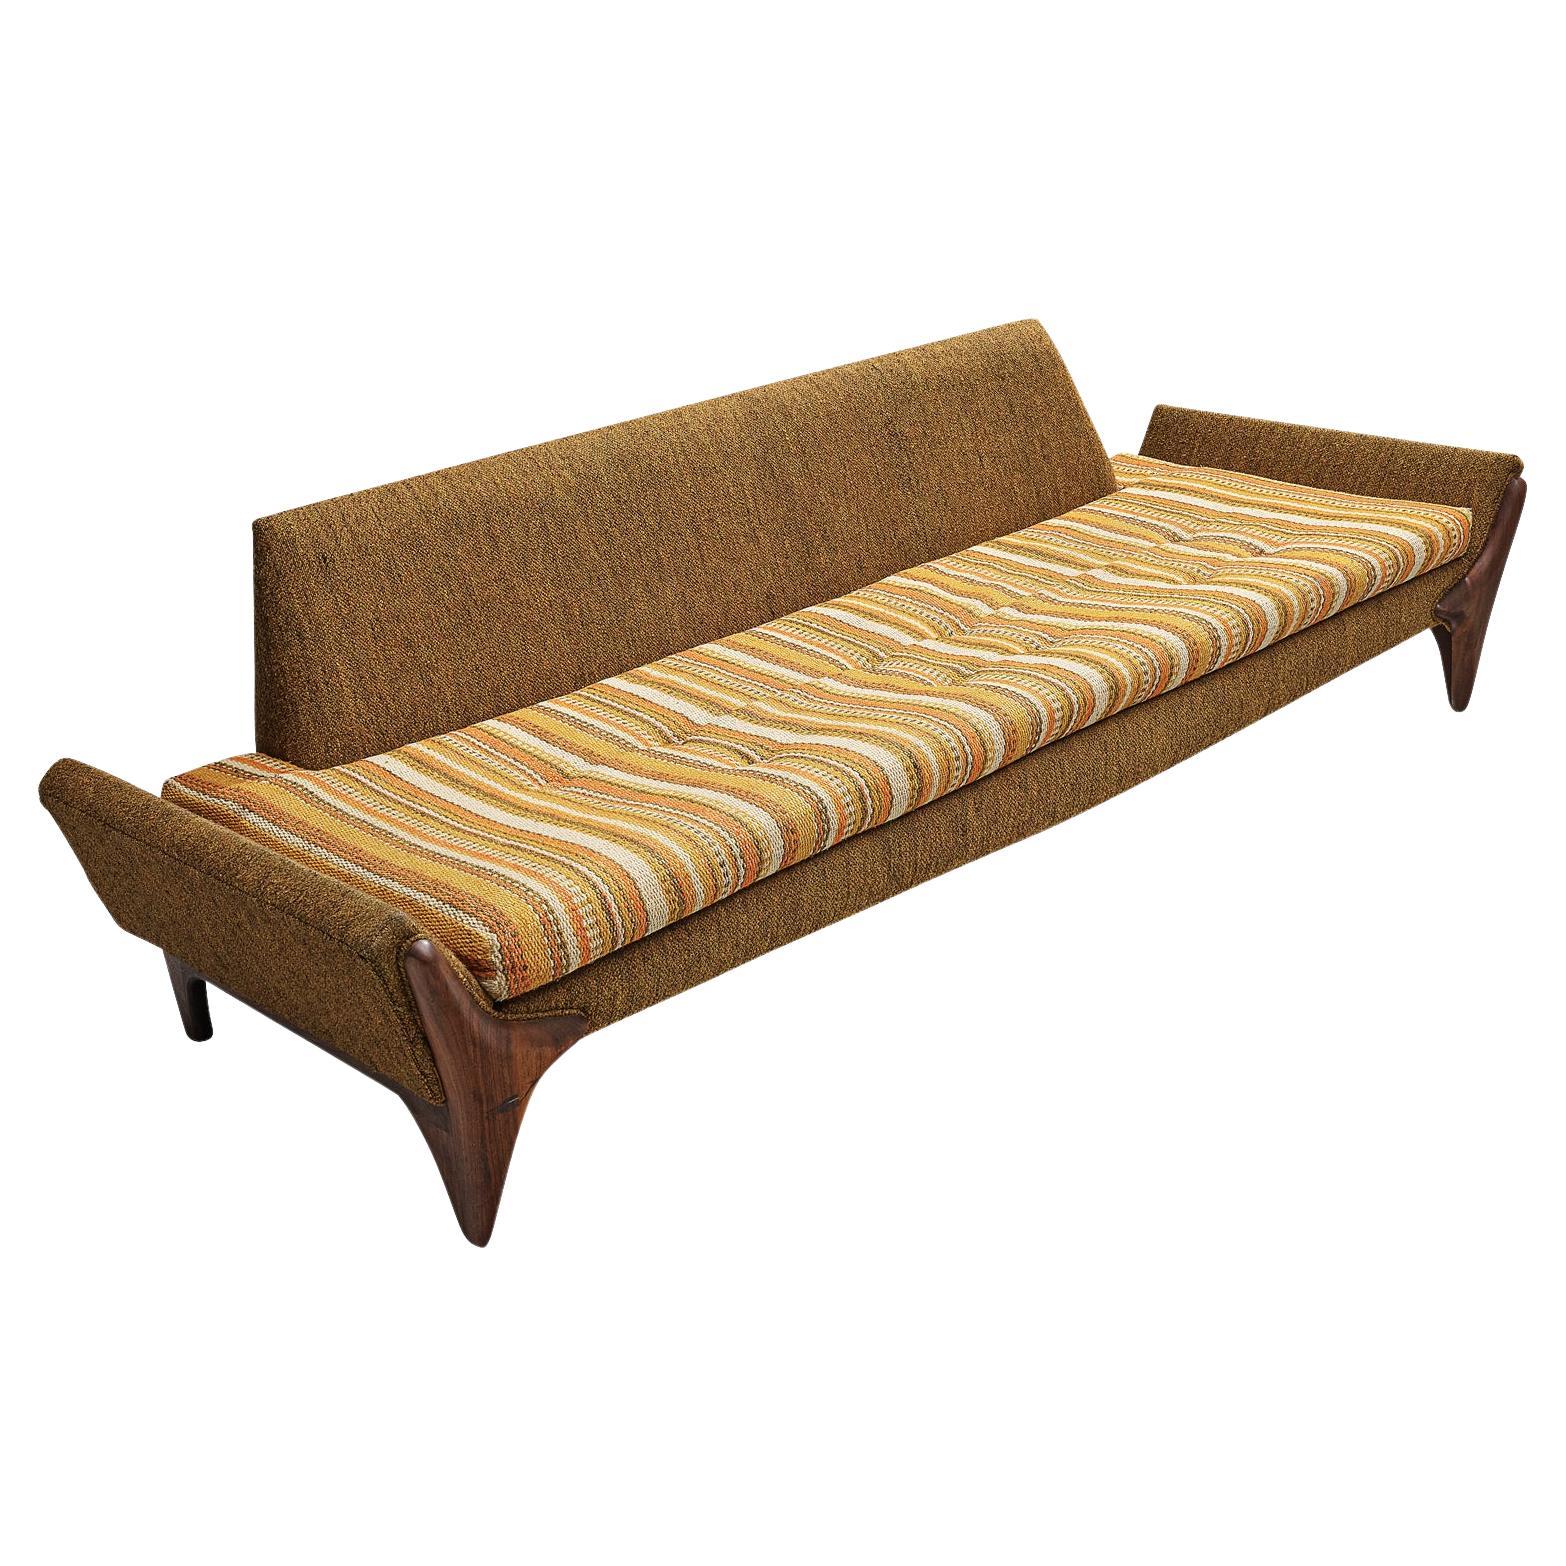 Adrian Pearsall Sofa in Ocher Yellow Striped Upholstery 